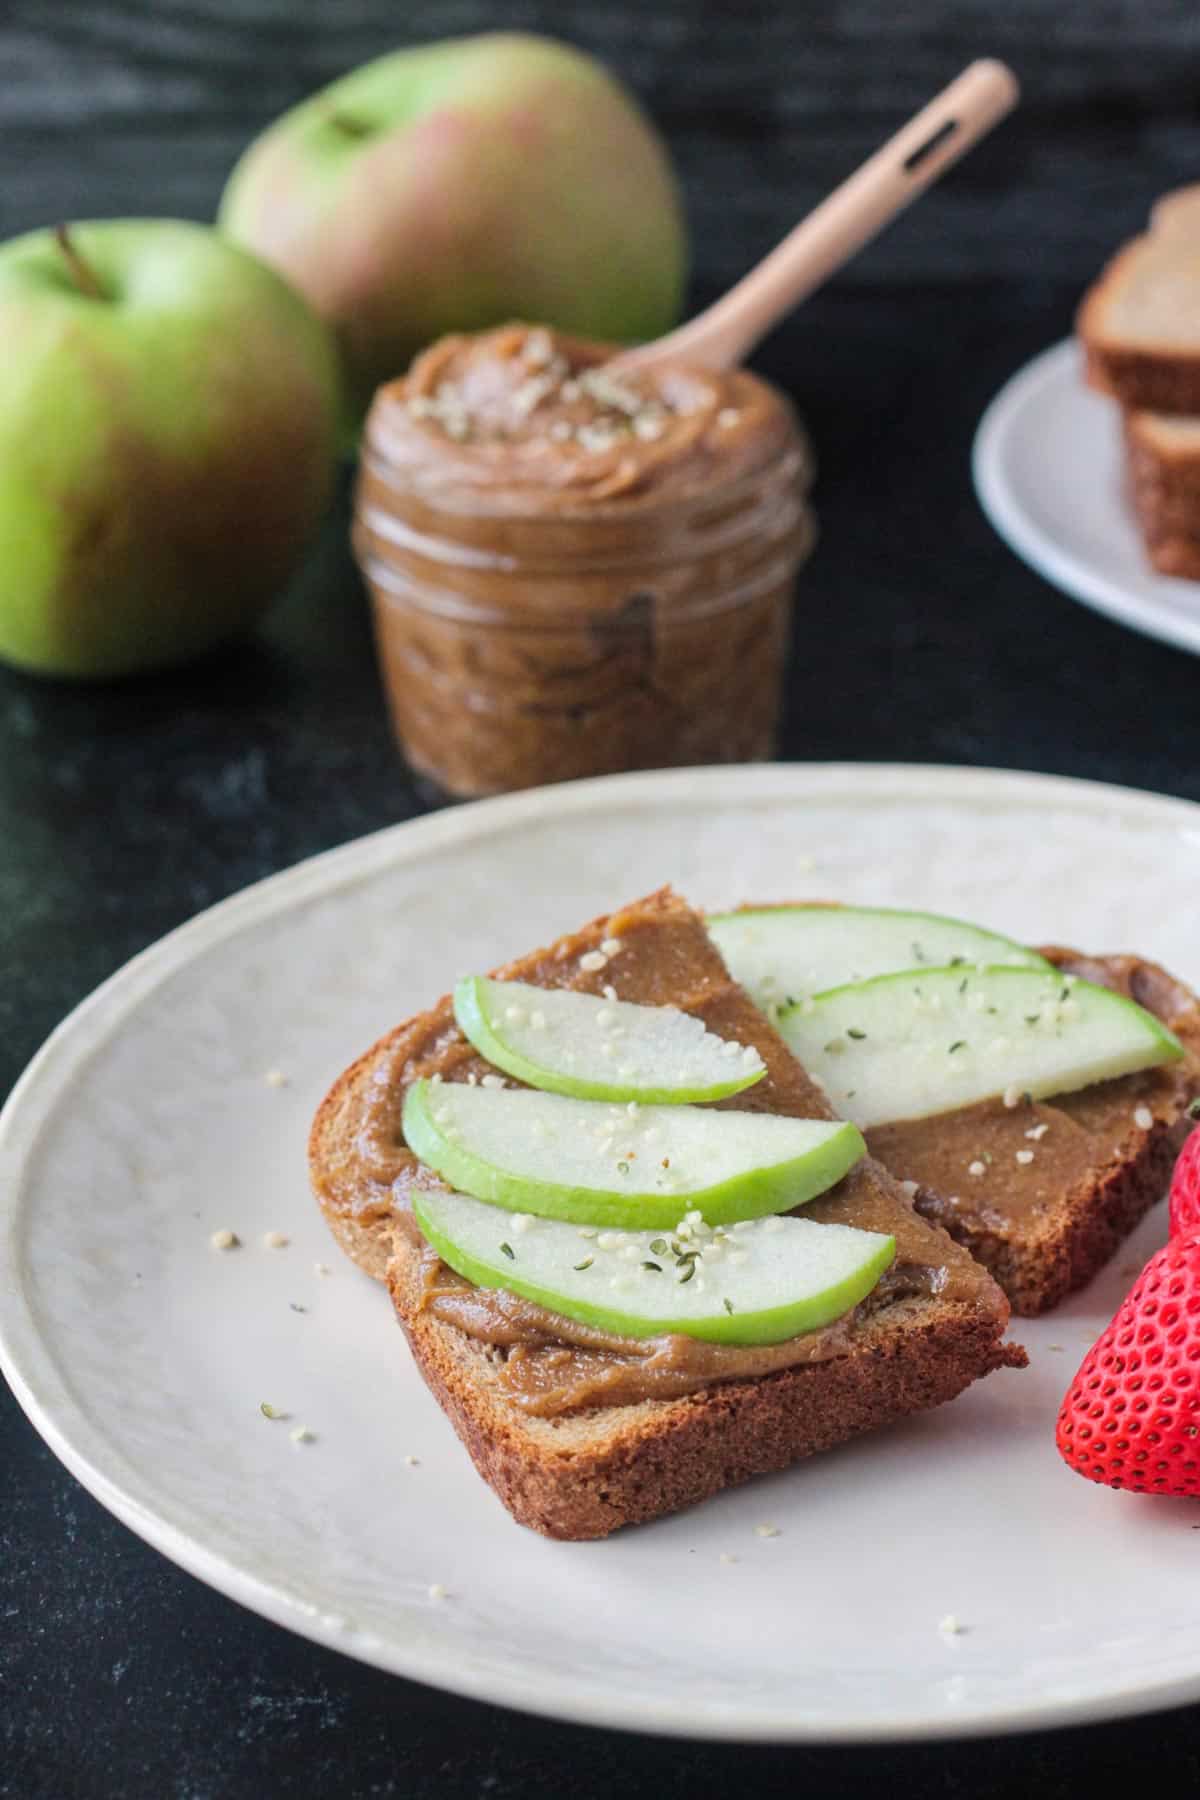 Piece of toast with cookie butter spread and apple slices.